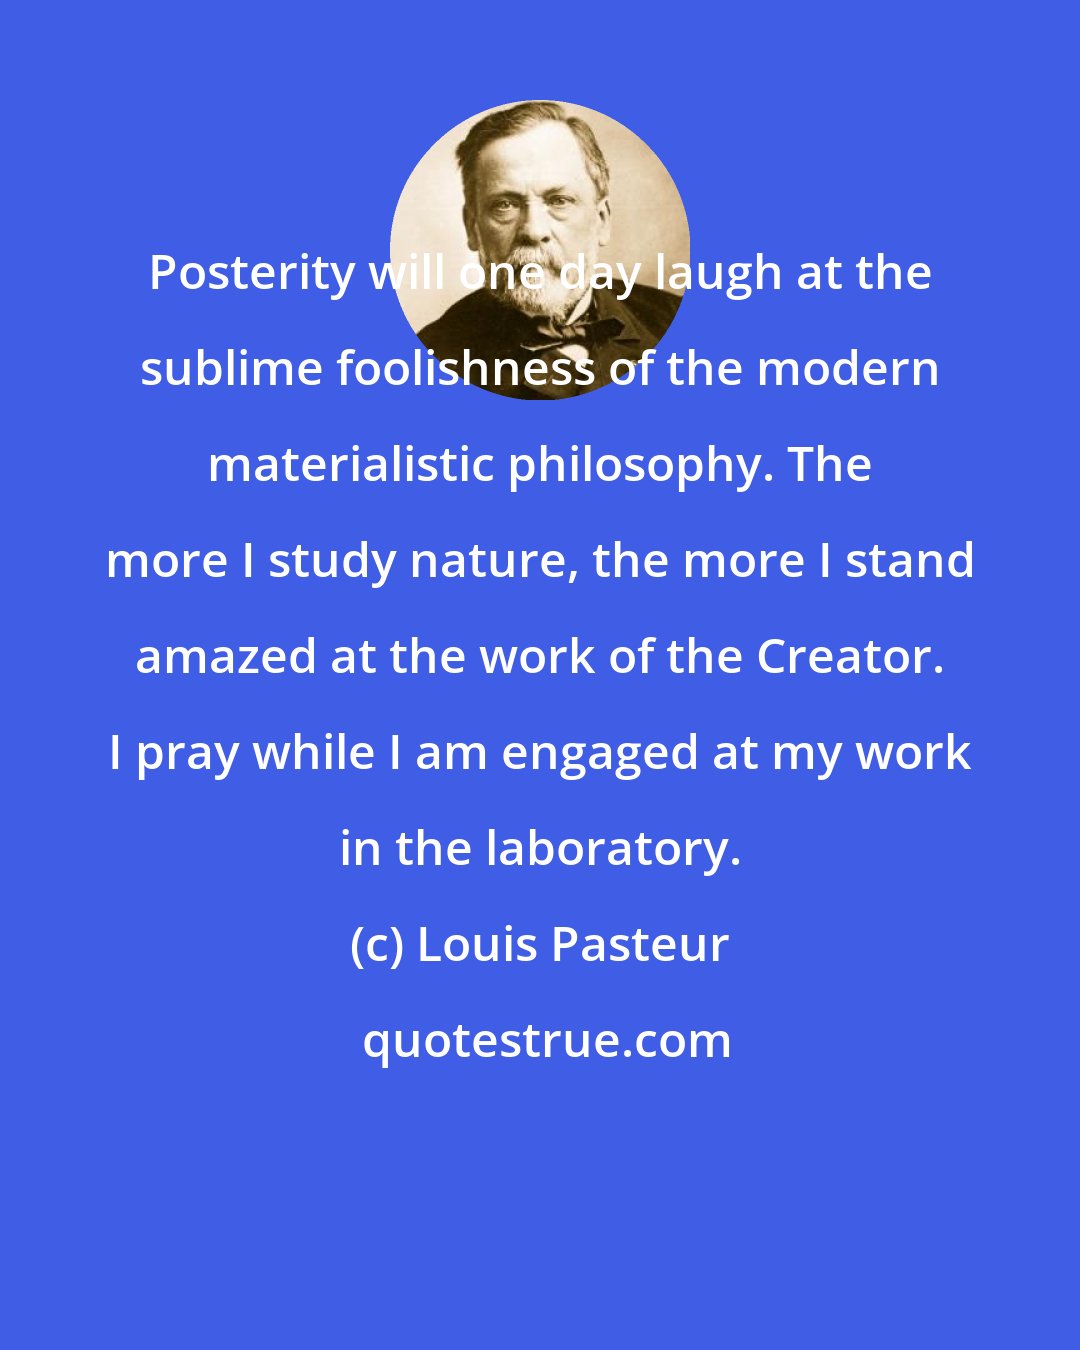 Louis Pasteur: Posterity will one day laugh at the sublime foolishness of the modern materialistic philosophy. The more I study nature, the more I stand amazed at the work of the Creator. I pray while I am engaged at my work in the laboratory.